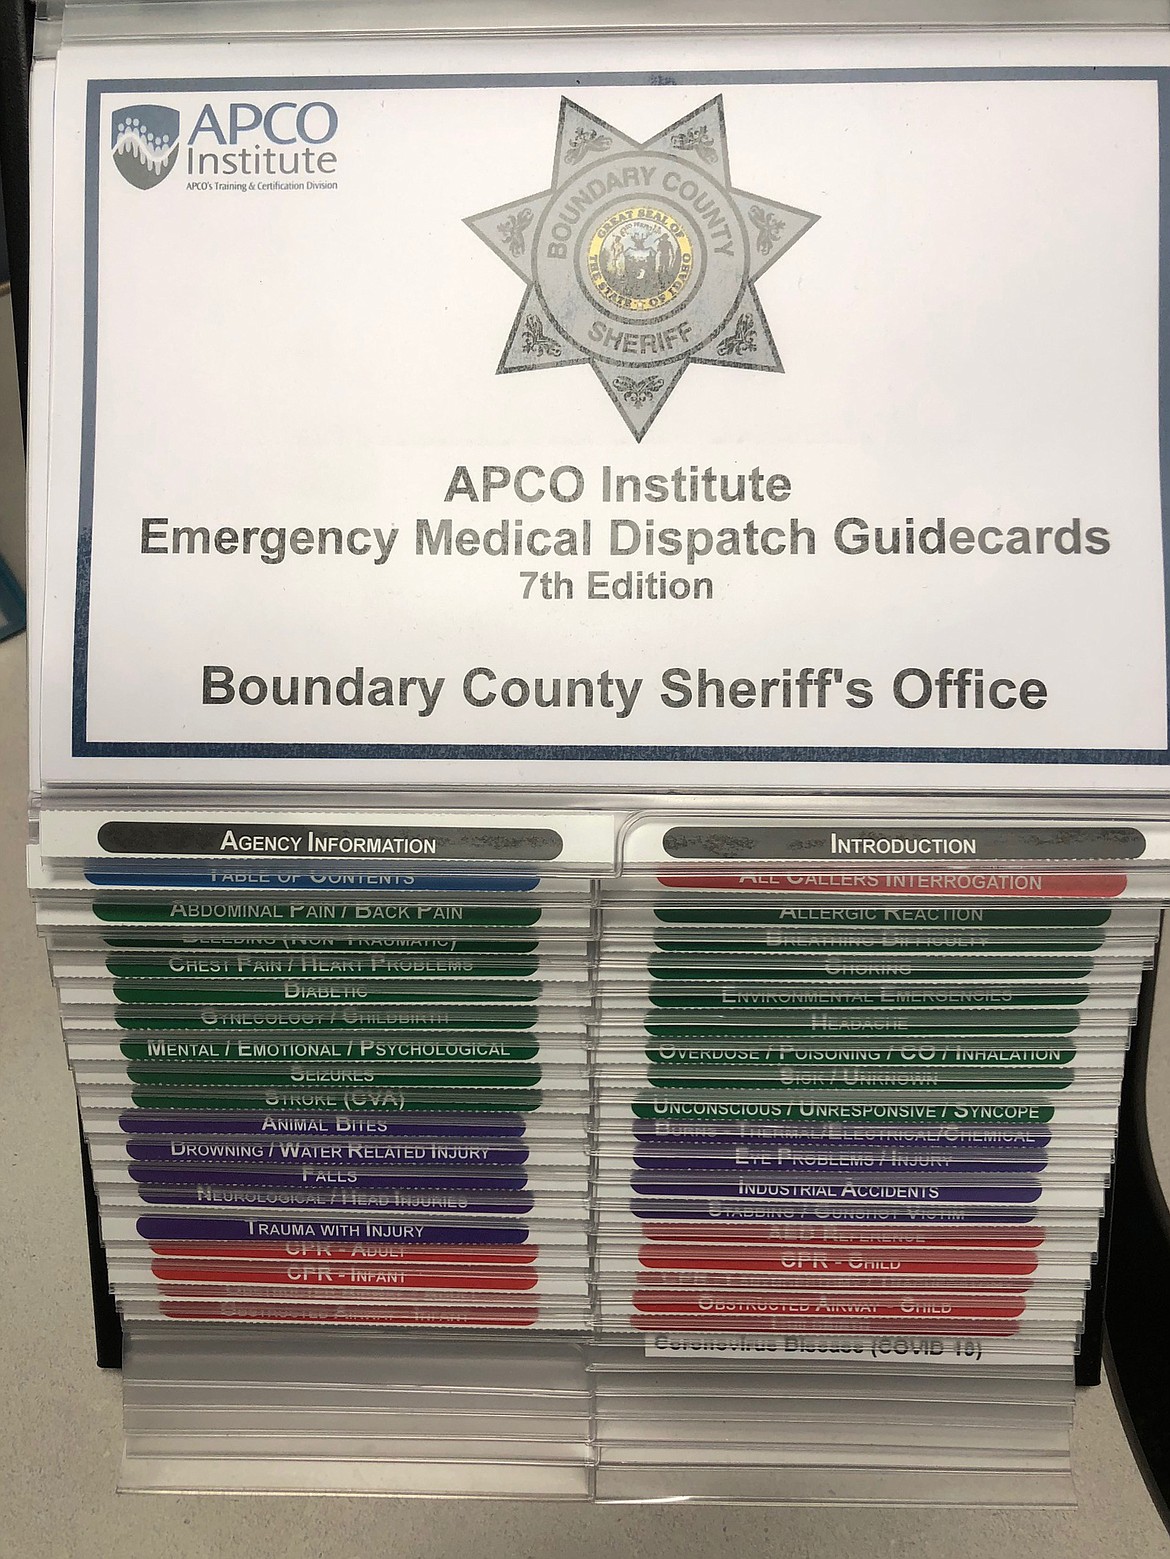 Photo by BOUNDARY COUNTY SHERIFF’S OFFICE
The 911 Dispatchers have been trained, as well as having guide cards to help with step by step instructions.